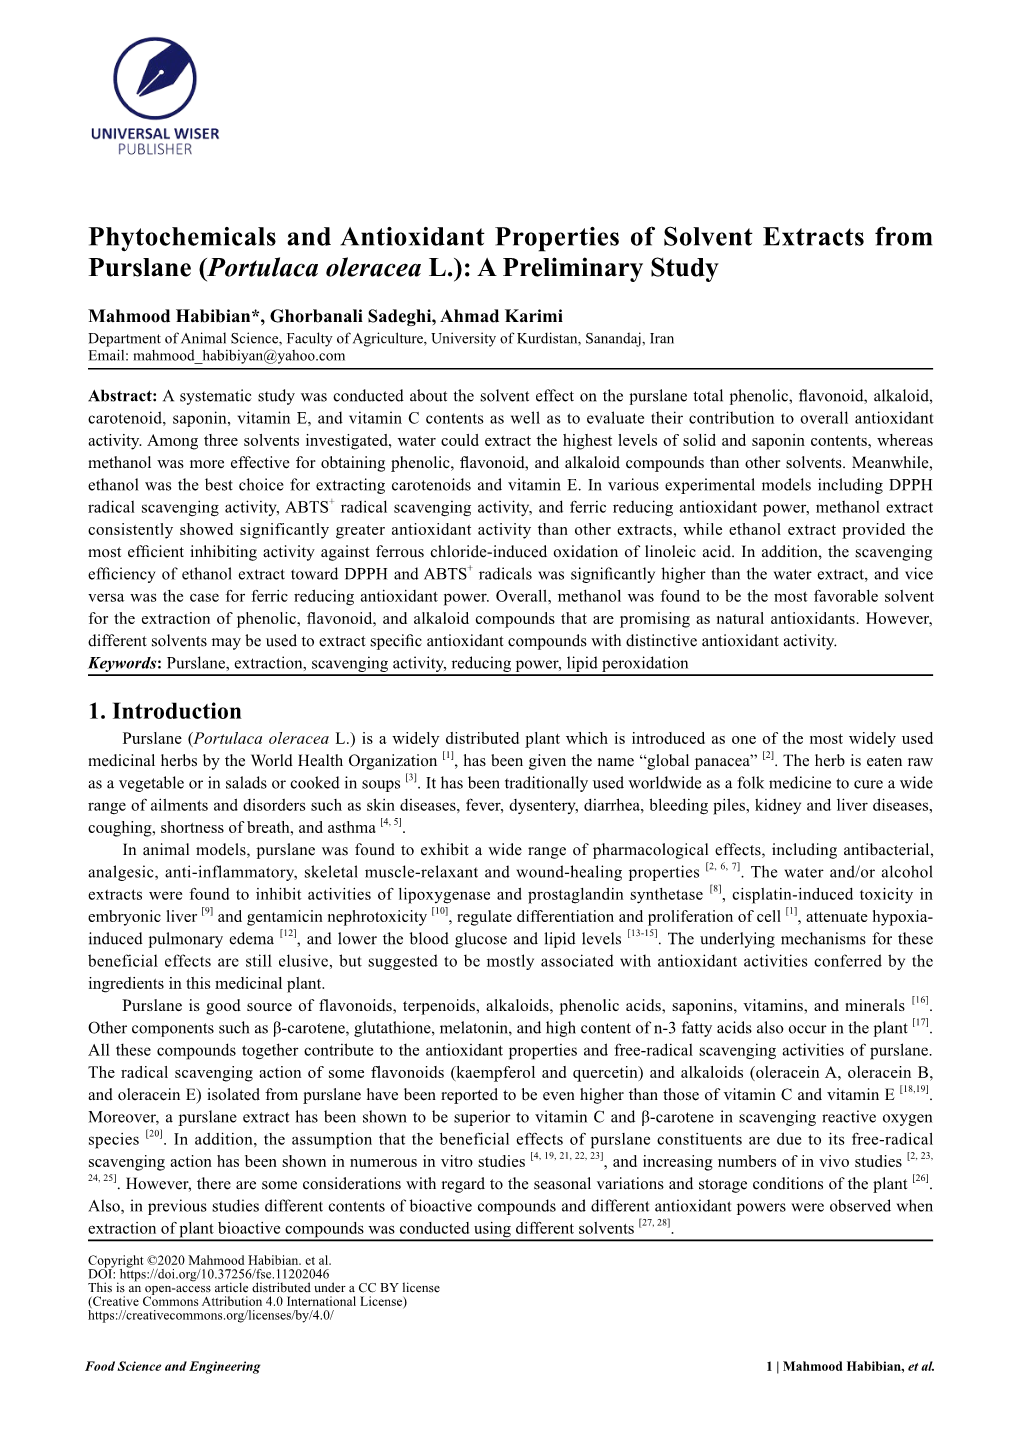 Phytochemicals and Antioxidant Properties of Solvent Extracts from Purslane (Portulaca Oleracea L.): a Preliminary Study